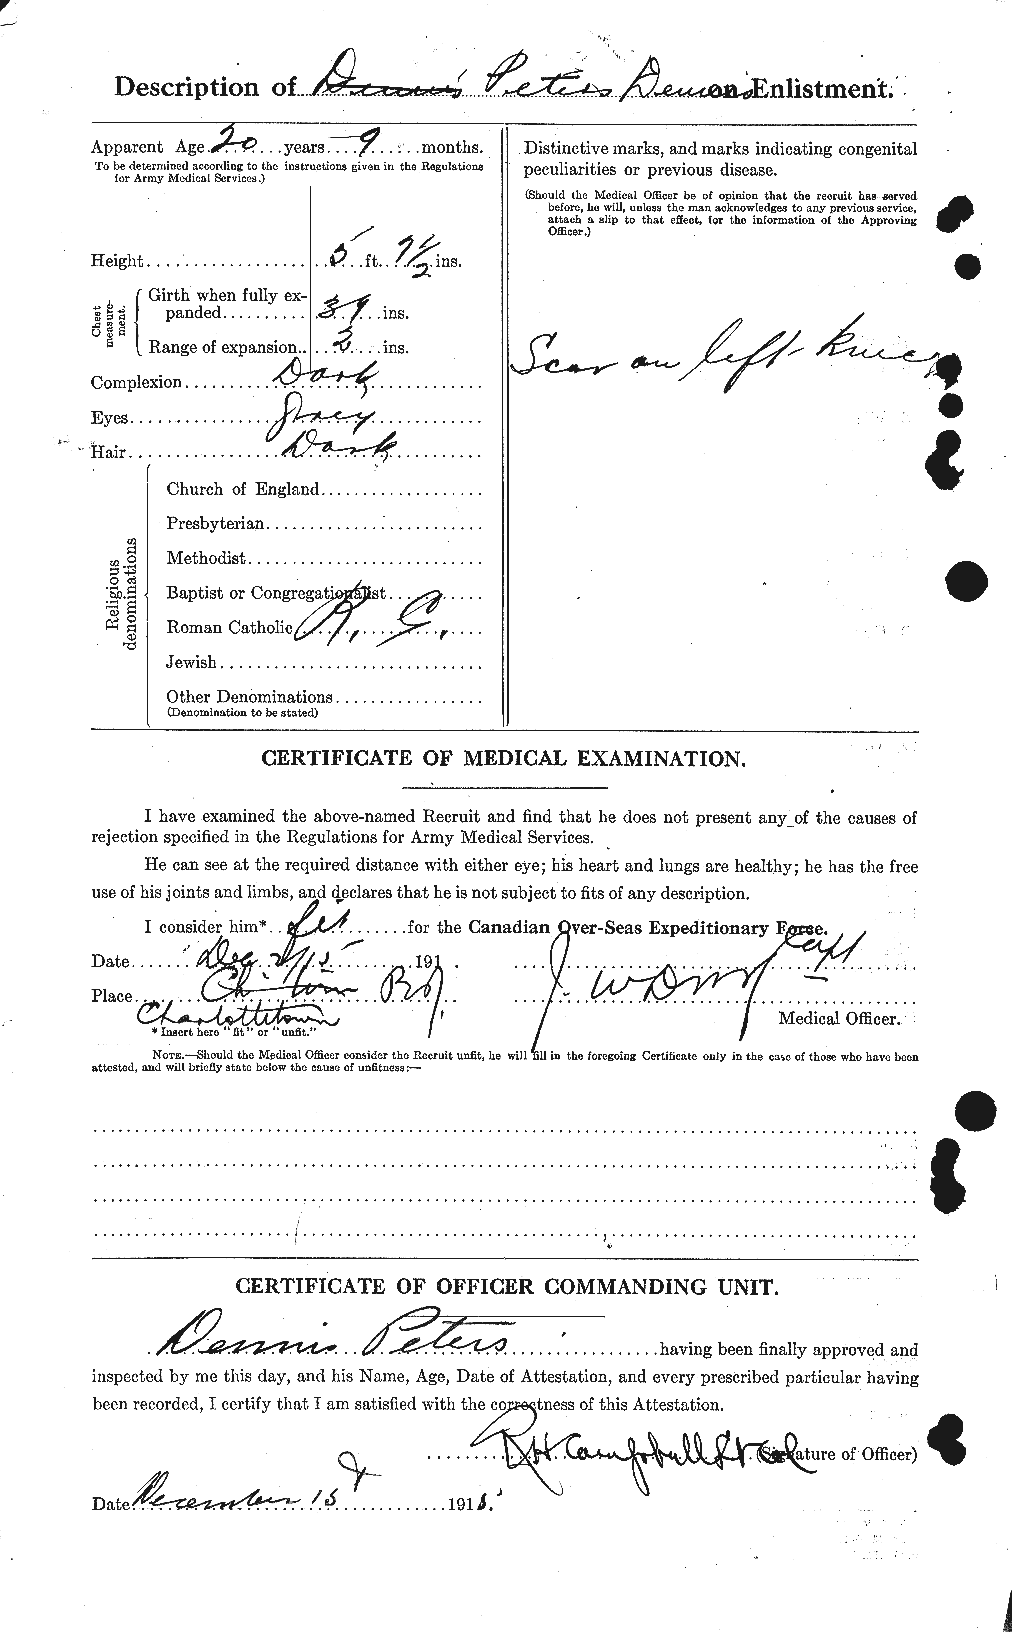 Personnel Records of the First World War - CEF 575395b